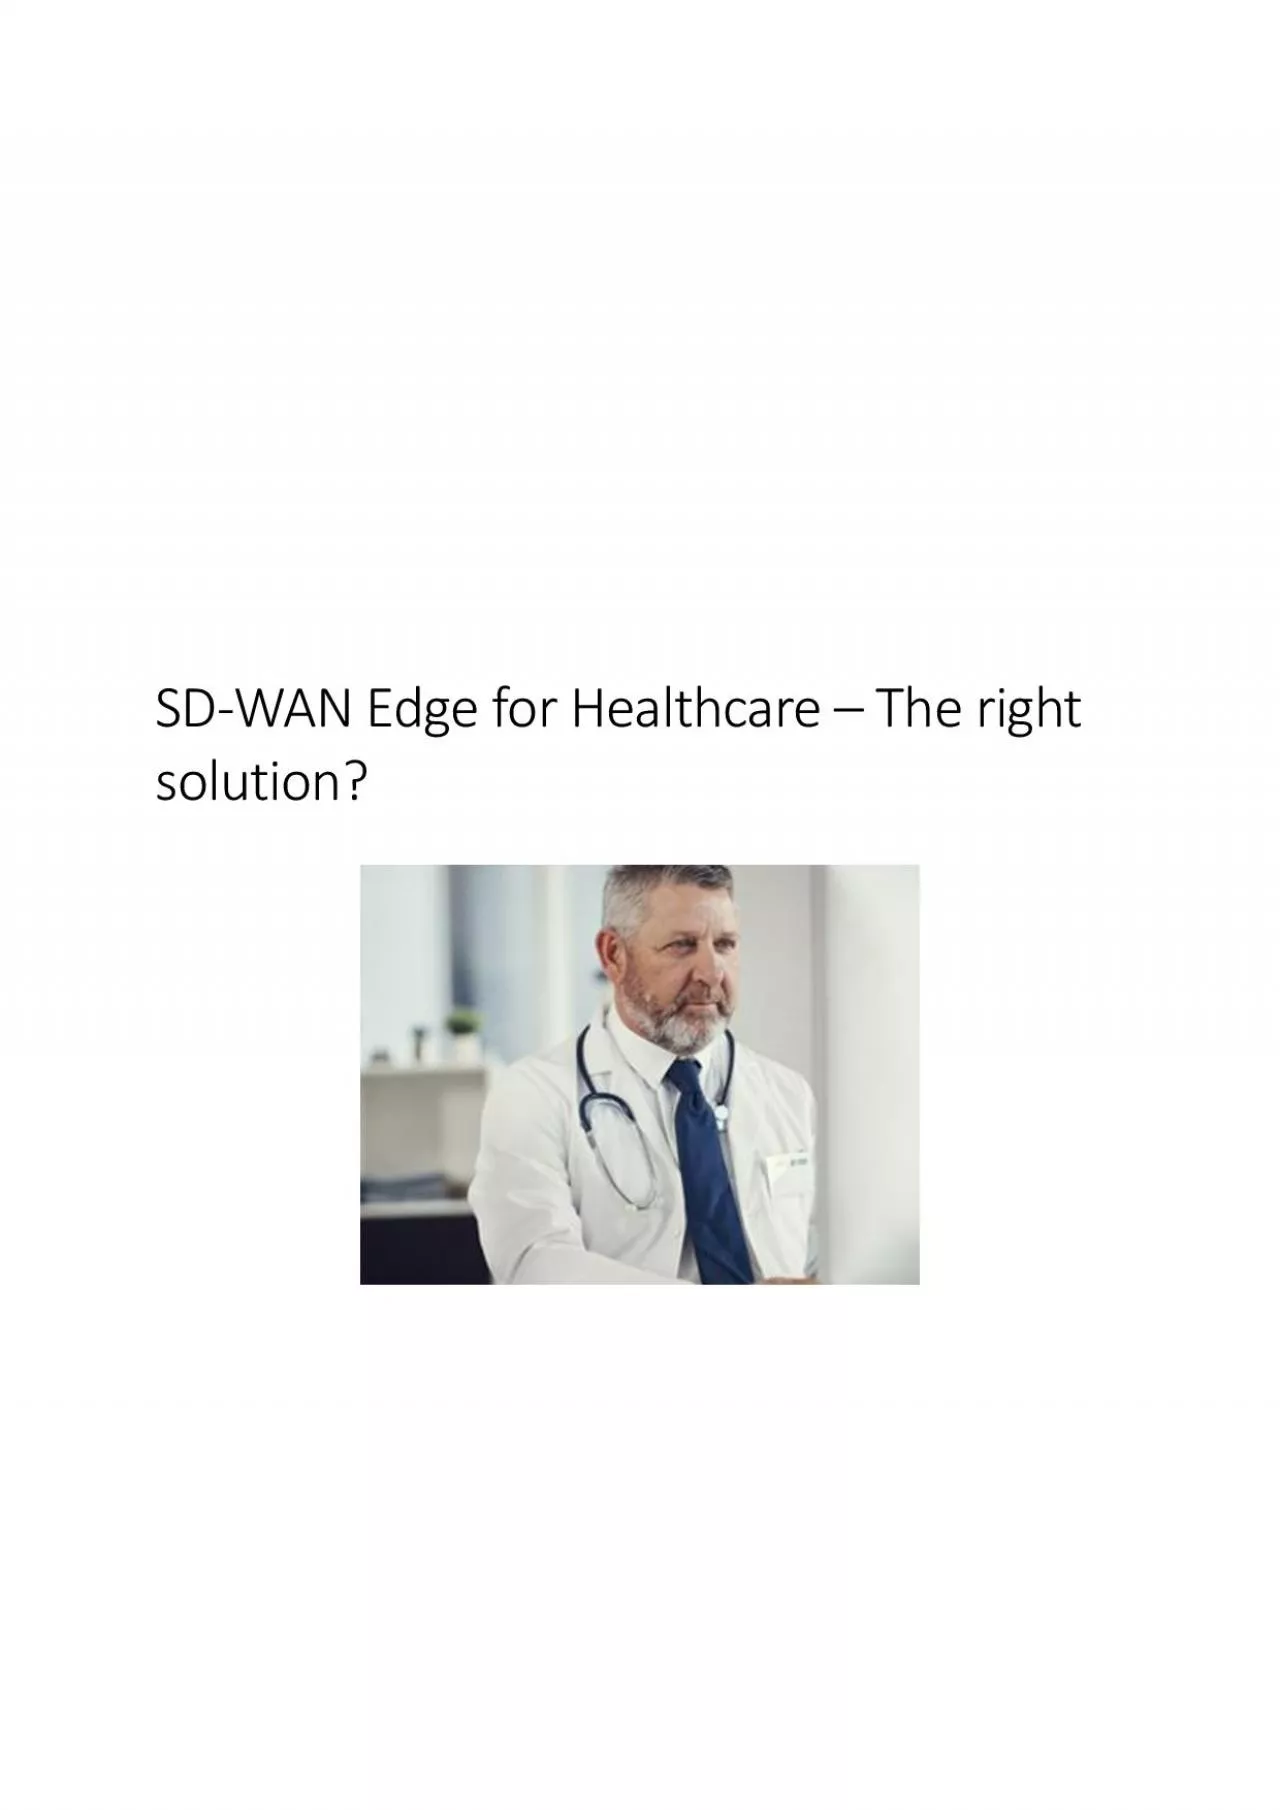 SD-WAN Edge for Healthcare – The right solution?